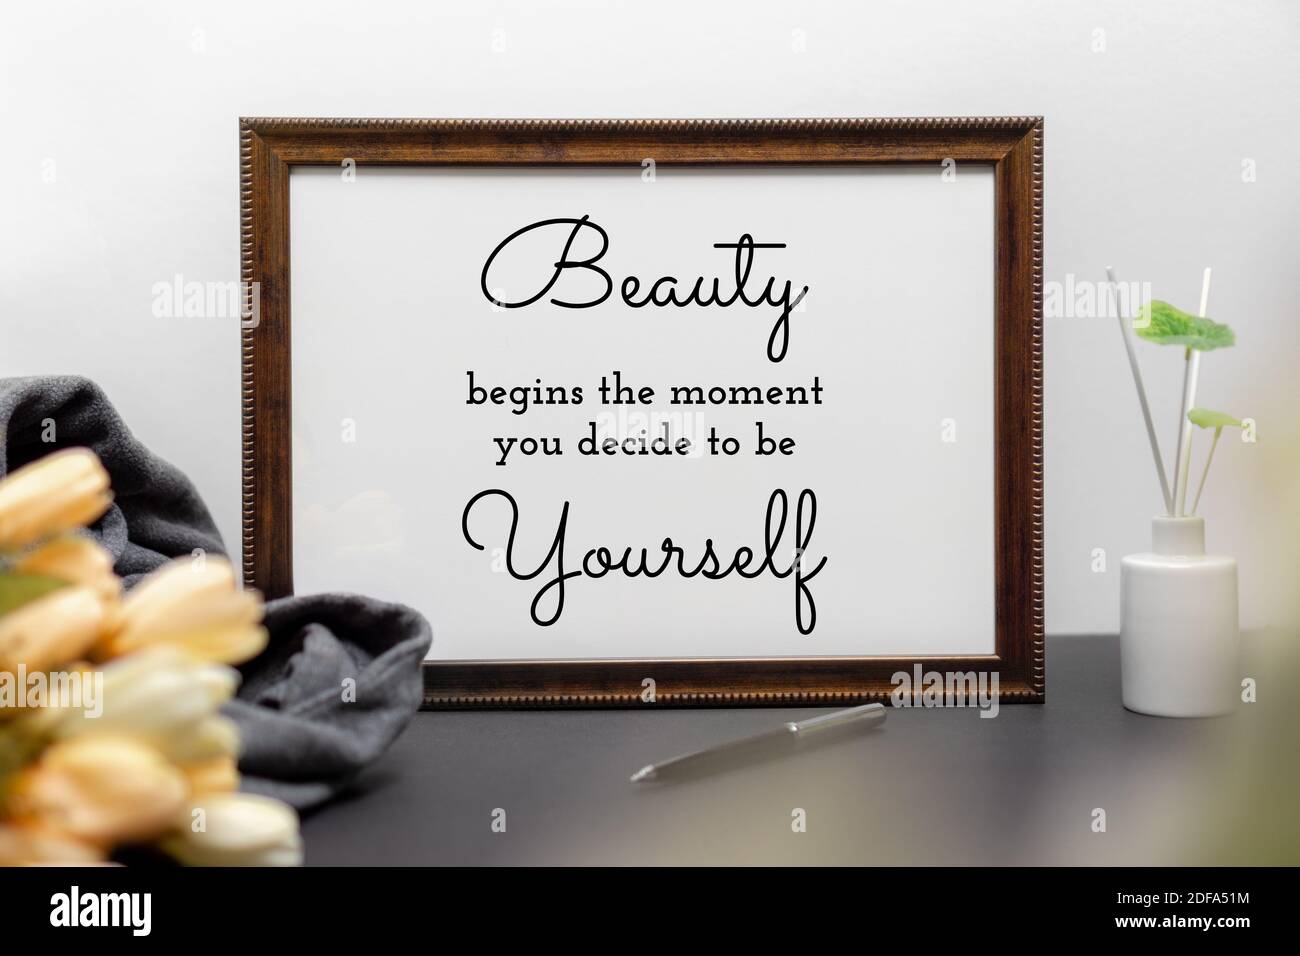 Inspirational and motivation beauty and life quote on wood frame